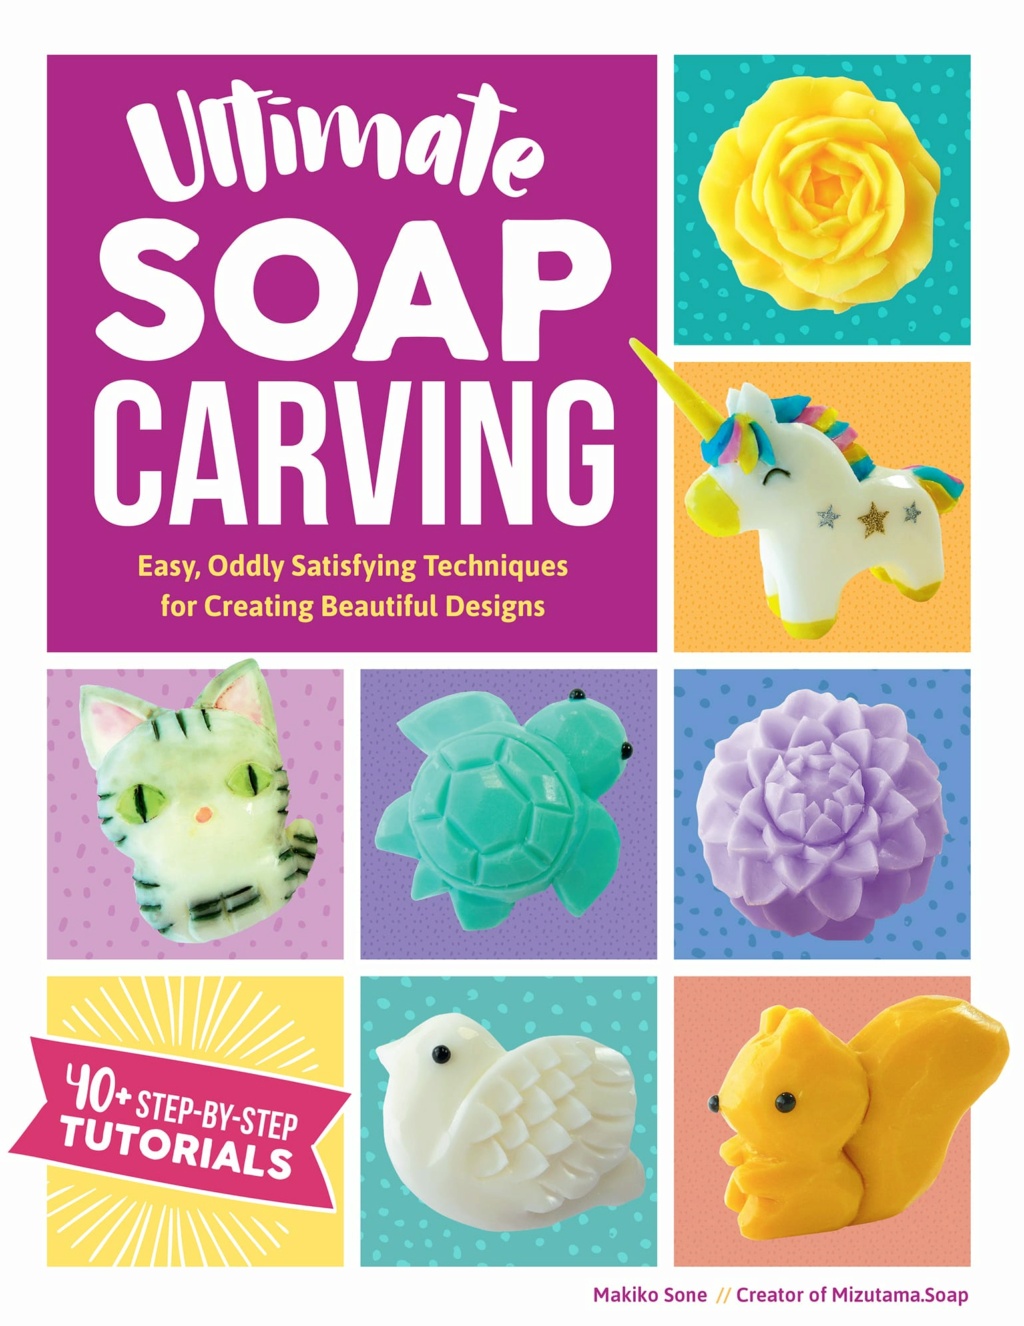 Ultimate Soap Carving: Easy, Oddly Satisfying Techniques for Creating Beautiful Designs Nhr5kw10